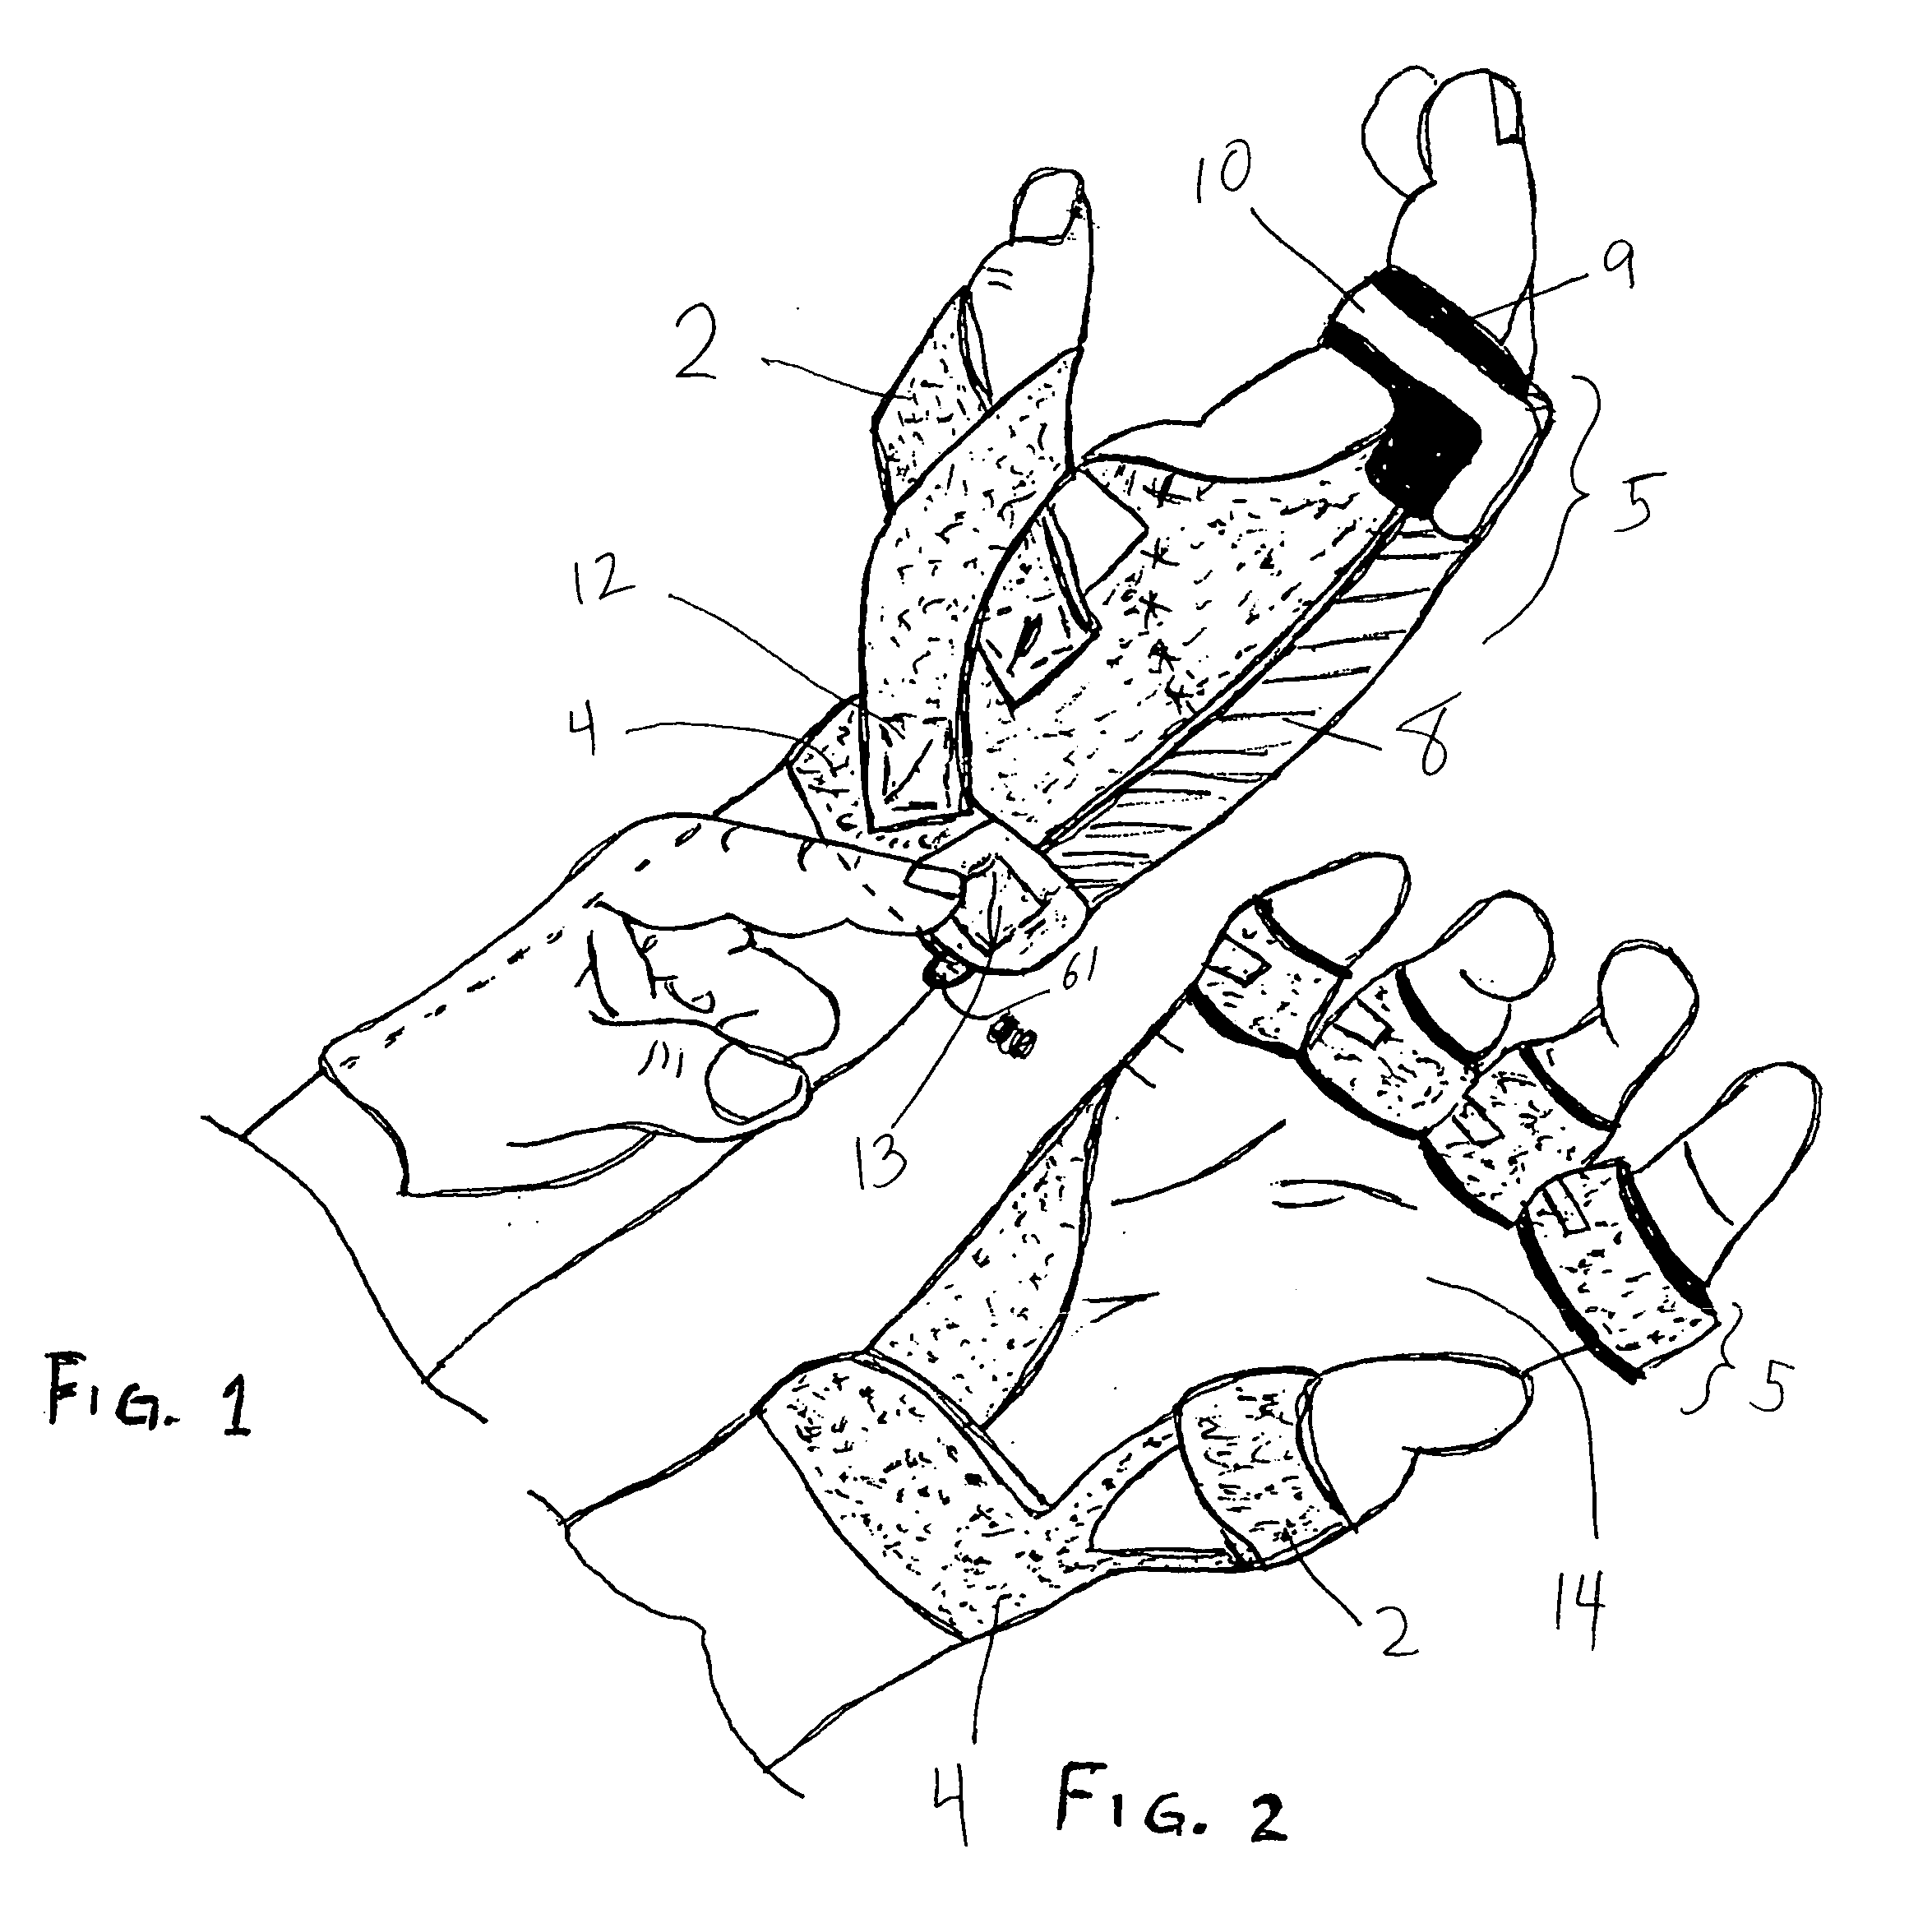 Low-profile, radial nerve splint with interchangeable resilient digit extensor elements and supination adjustment means